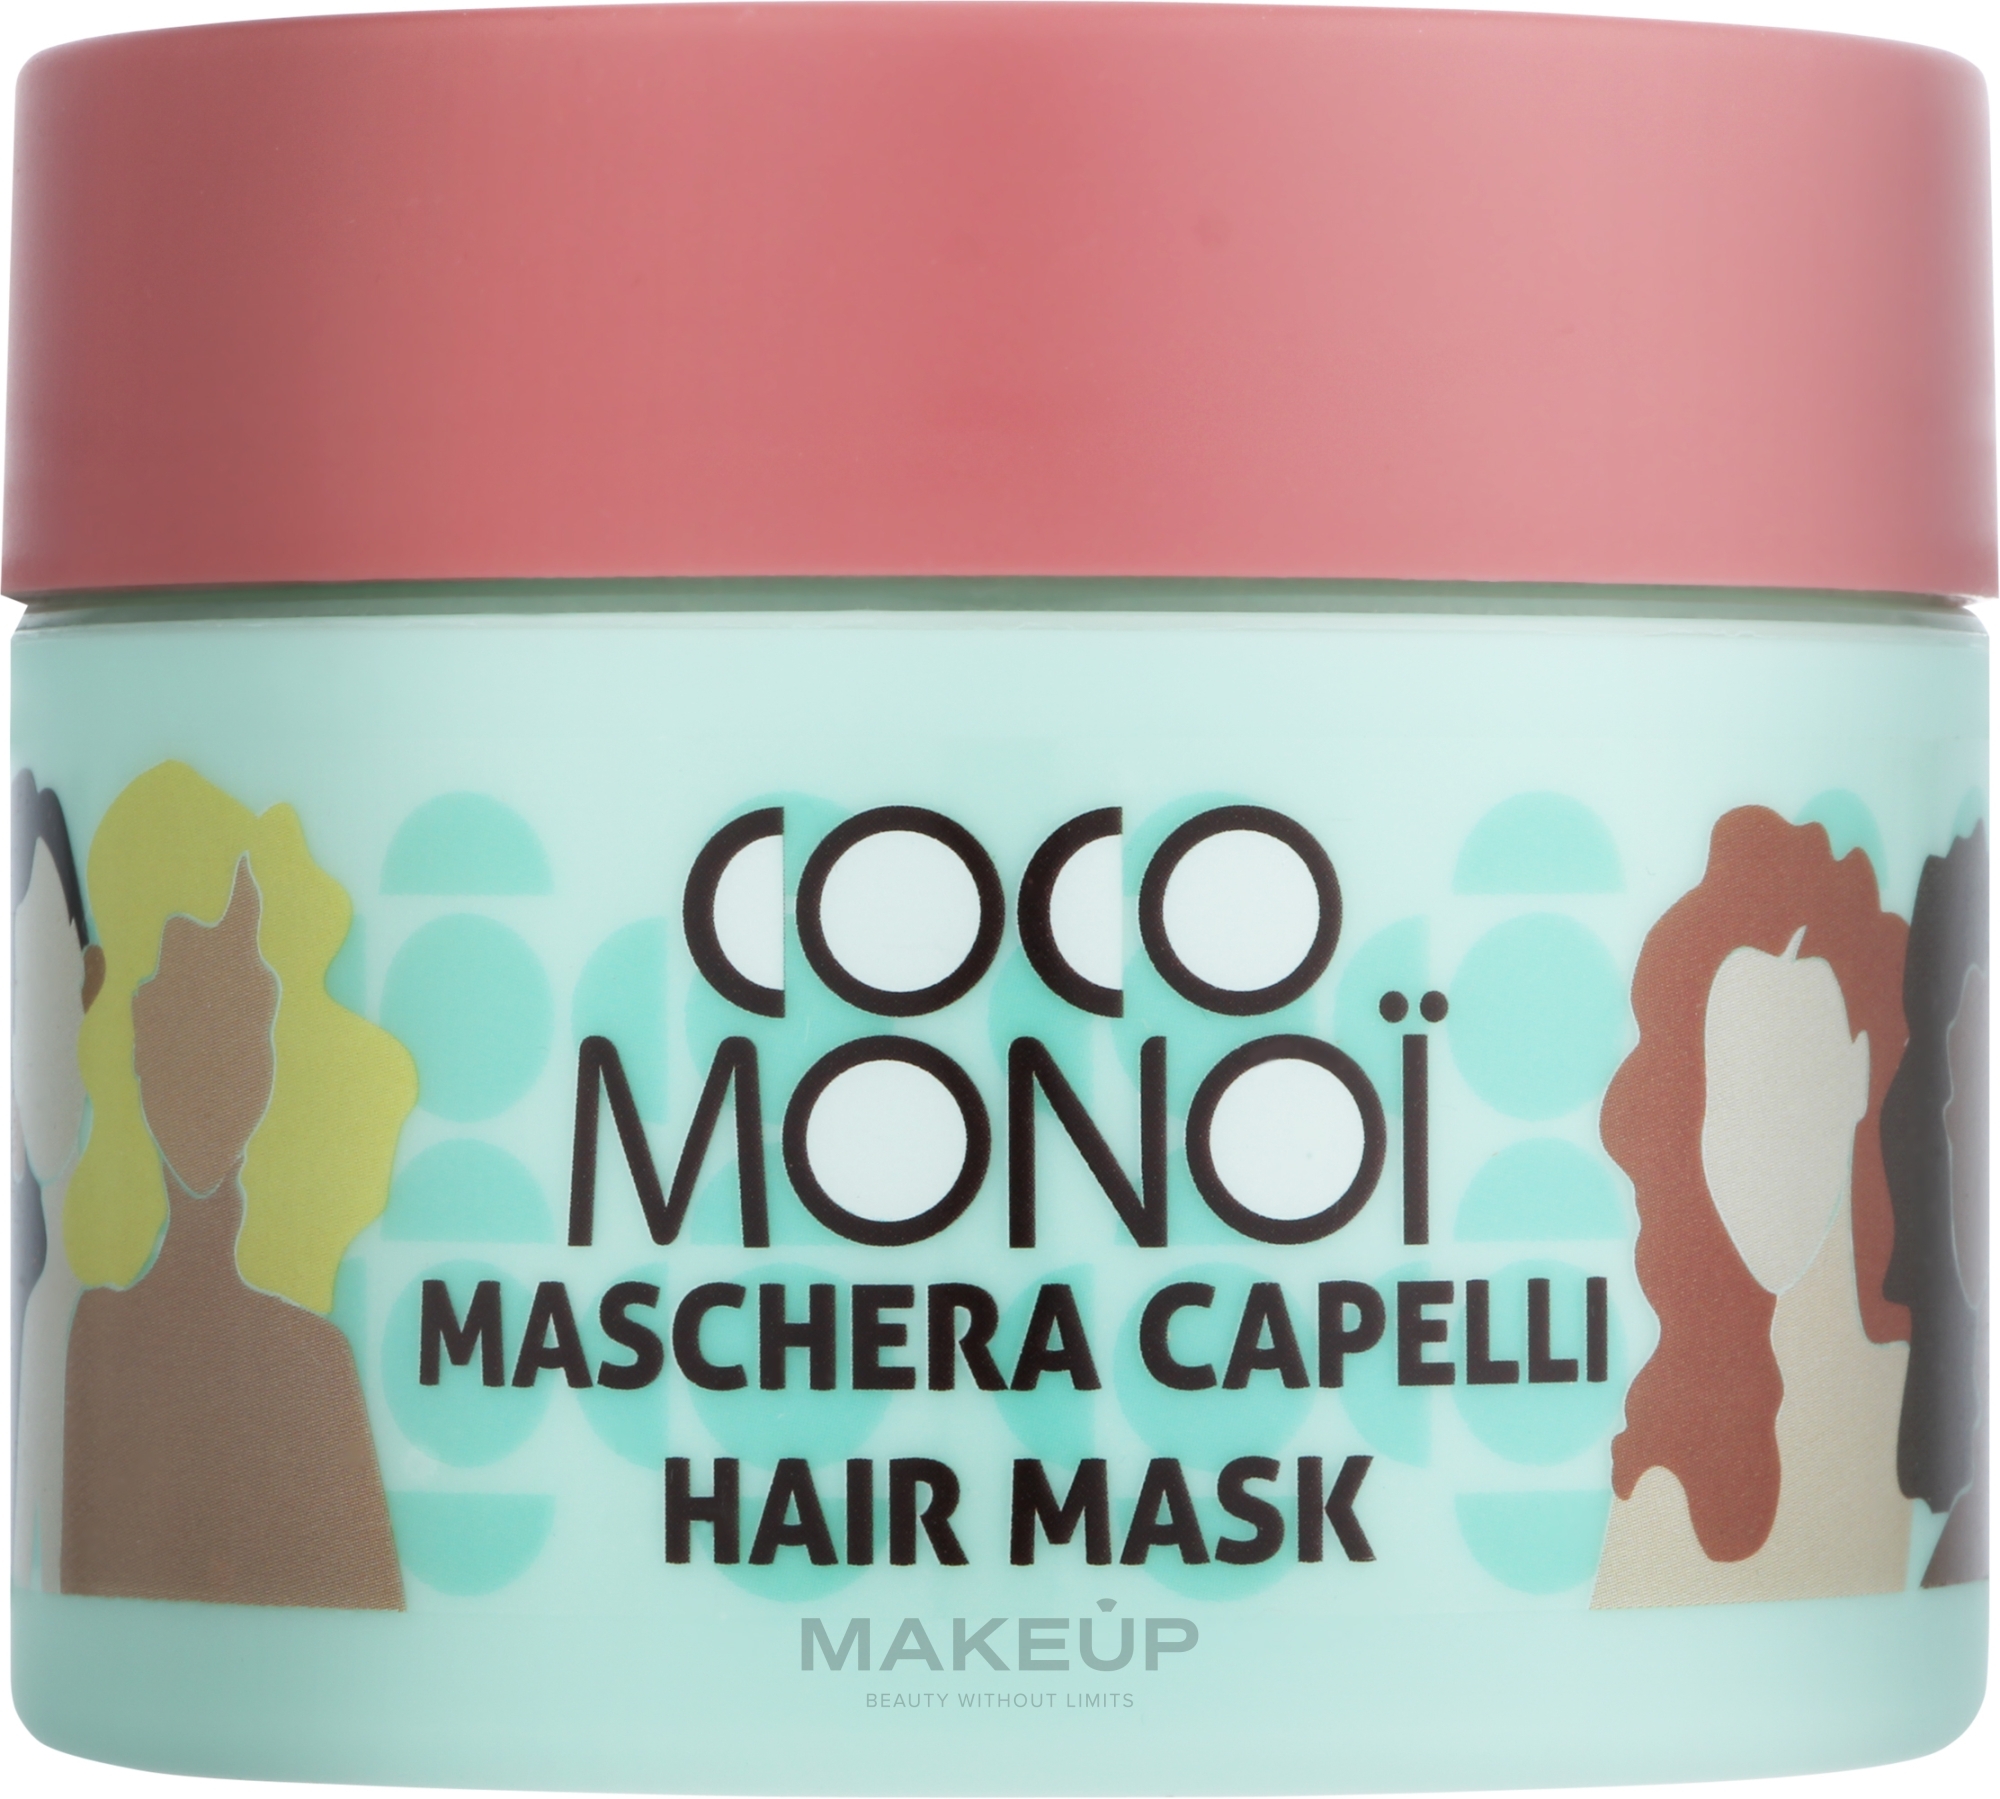 3in1 Hair Mask - Coco Monoi Hair Mask 3 In 1 — photo 250 ml